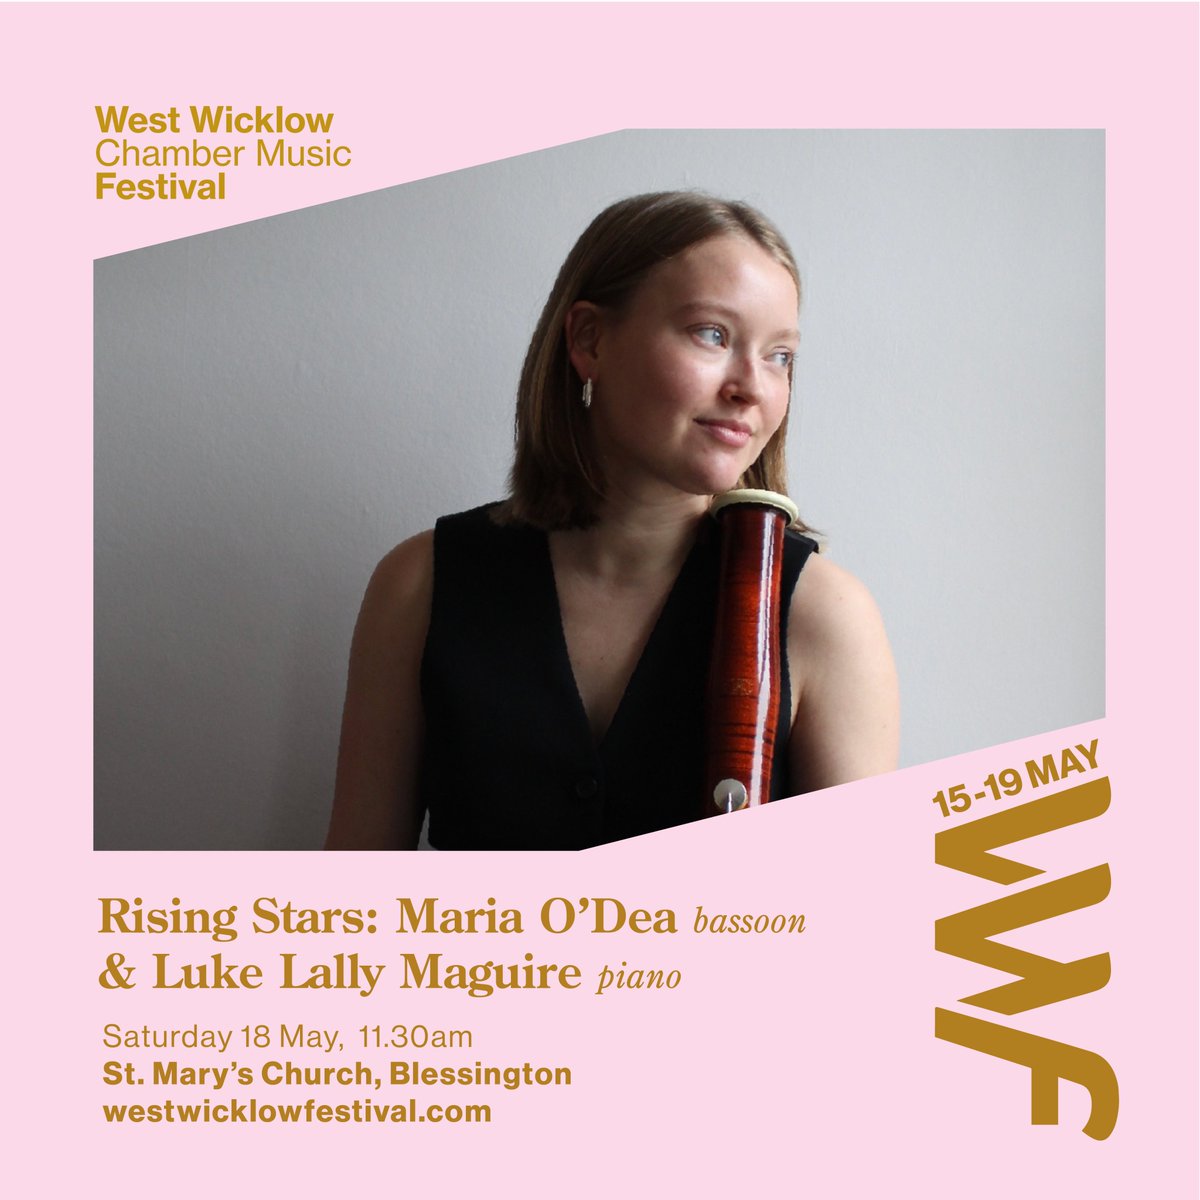 💫This Saturday 18 May @WestWicFestival : Rising Stars Maria O’Dea (bassoon) & Luke Lally Maguire (piano) present new work by Dublin-based composer Abigail Smith. CMC is delighted to host an interview with Abigail as part of this event. Info & booking 🔗 westwicklowfestival.com/whats-on/risin…